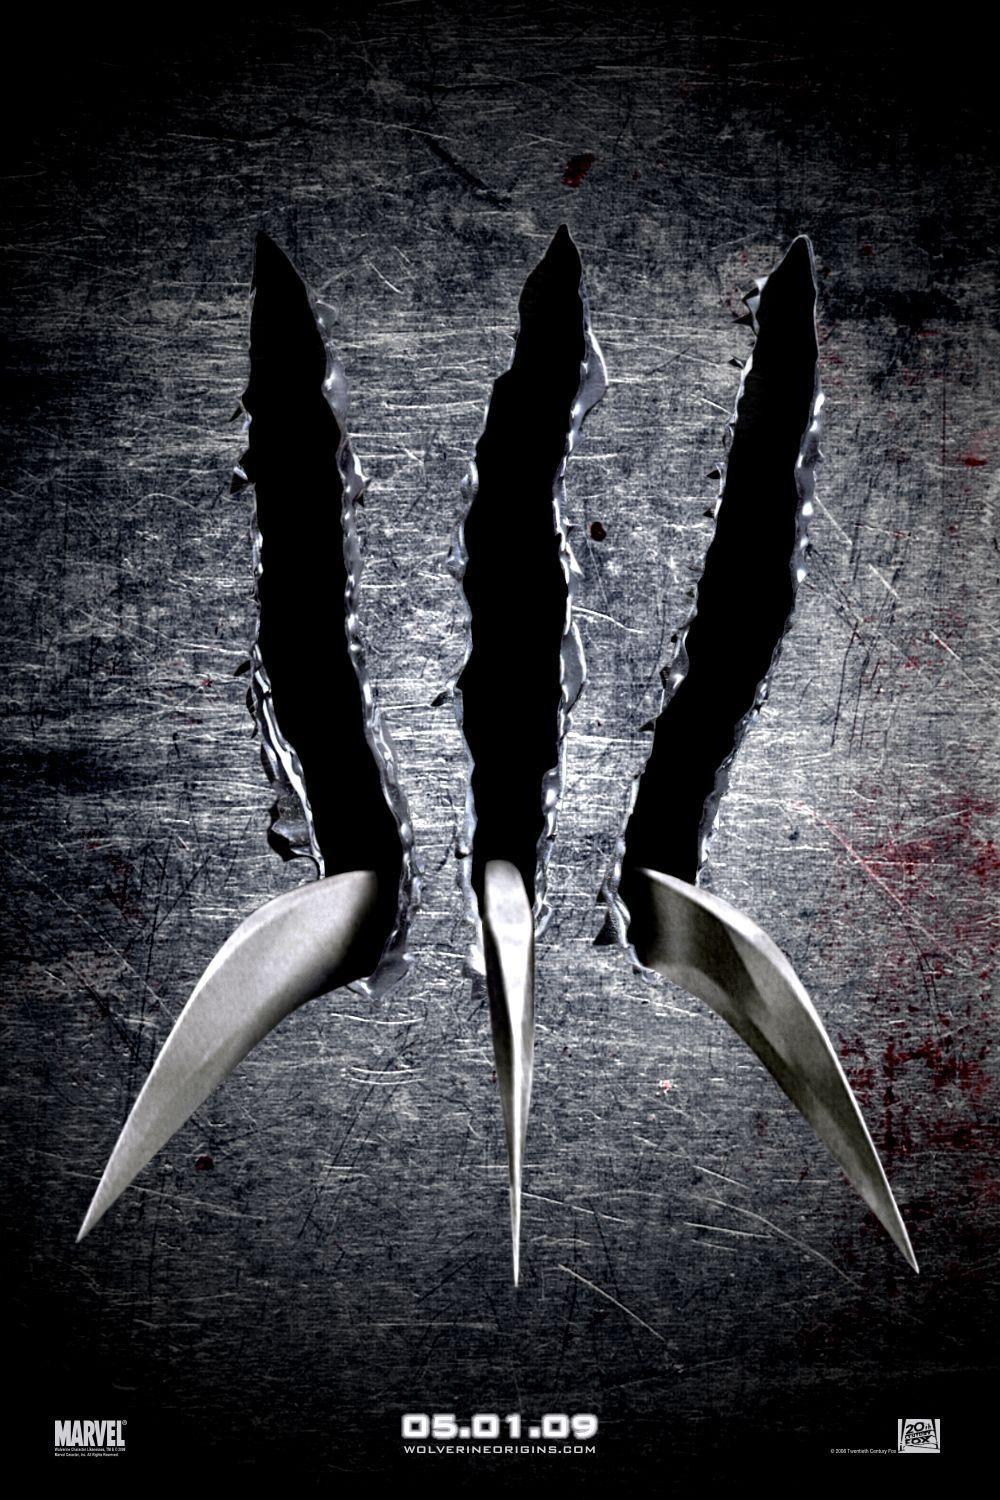 Download Wolverine Claws Image For Free Wallpaper Monodomo. Wolverine movie, Wolverine claws, Wolverine poster